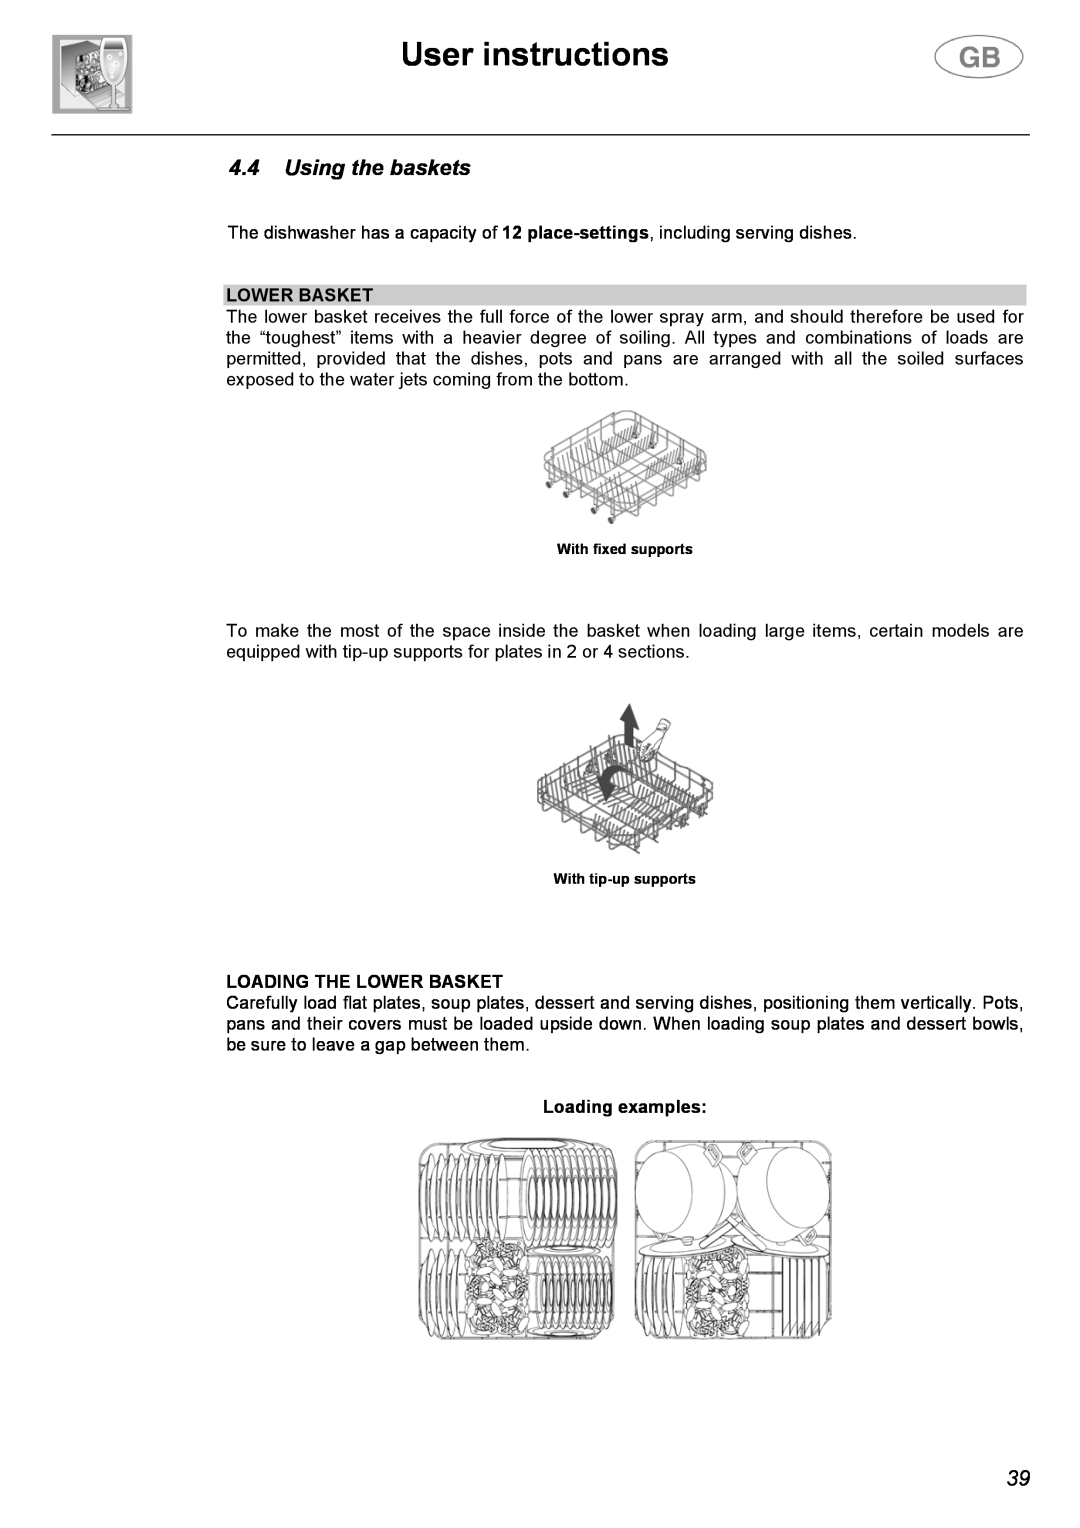 Smeg DW612ST instruction manual User instructions, 4.4Using the baskets, Loading The Lower Basket, Loading examples 